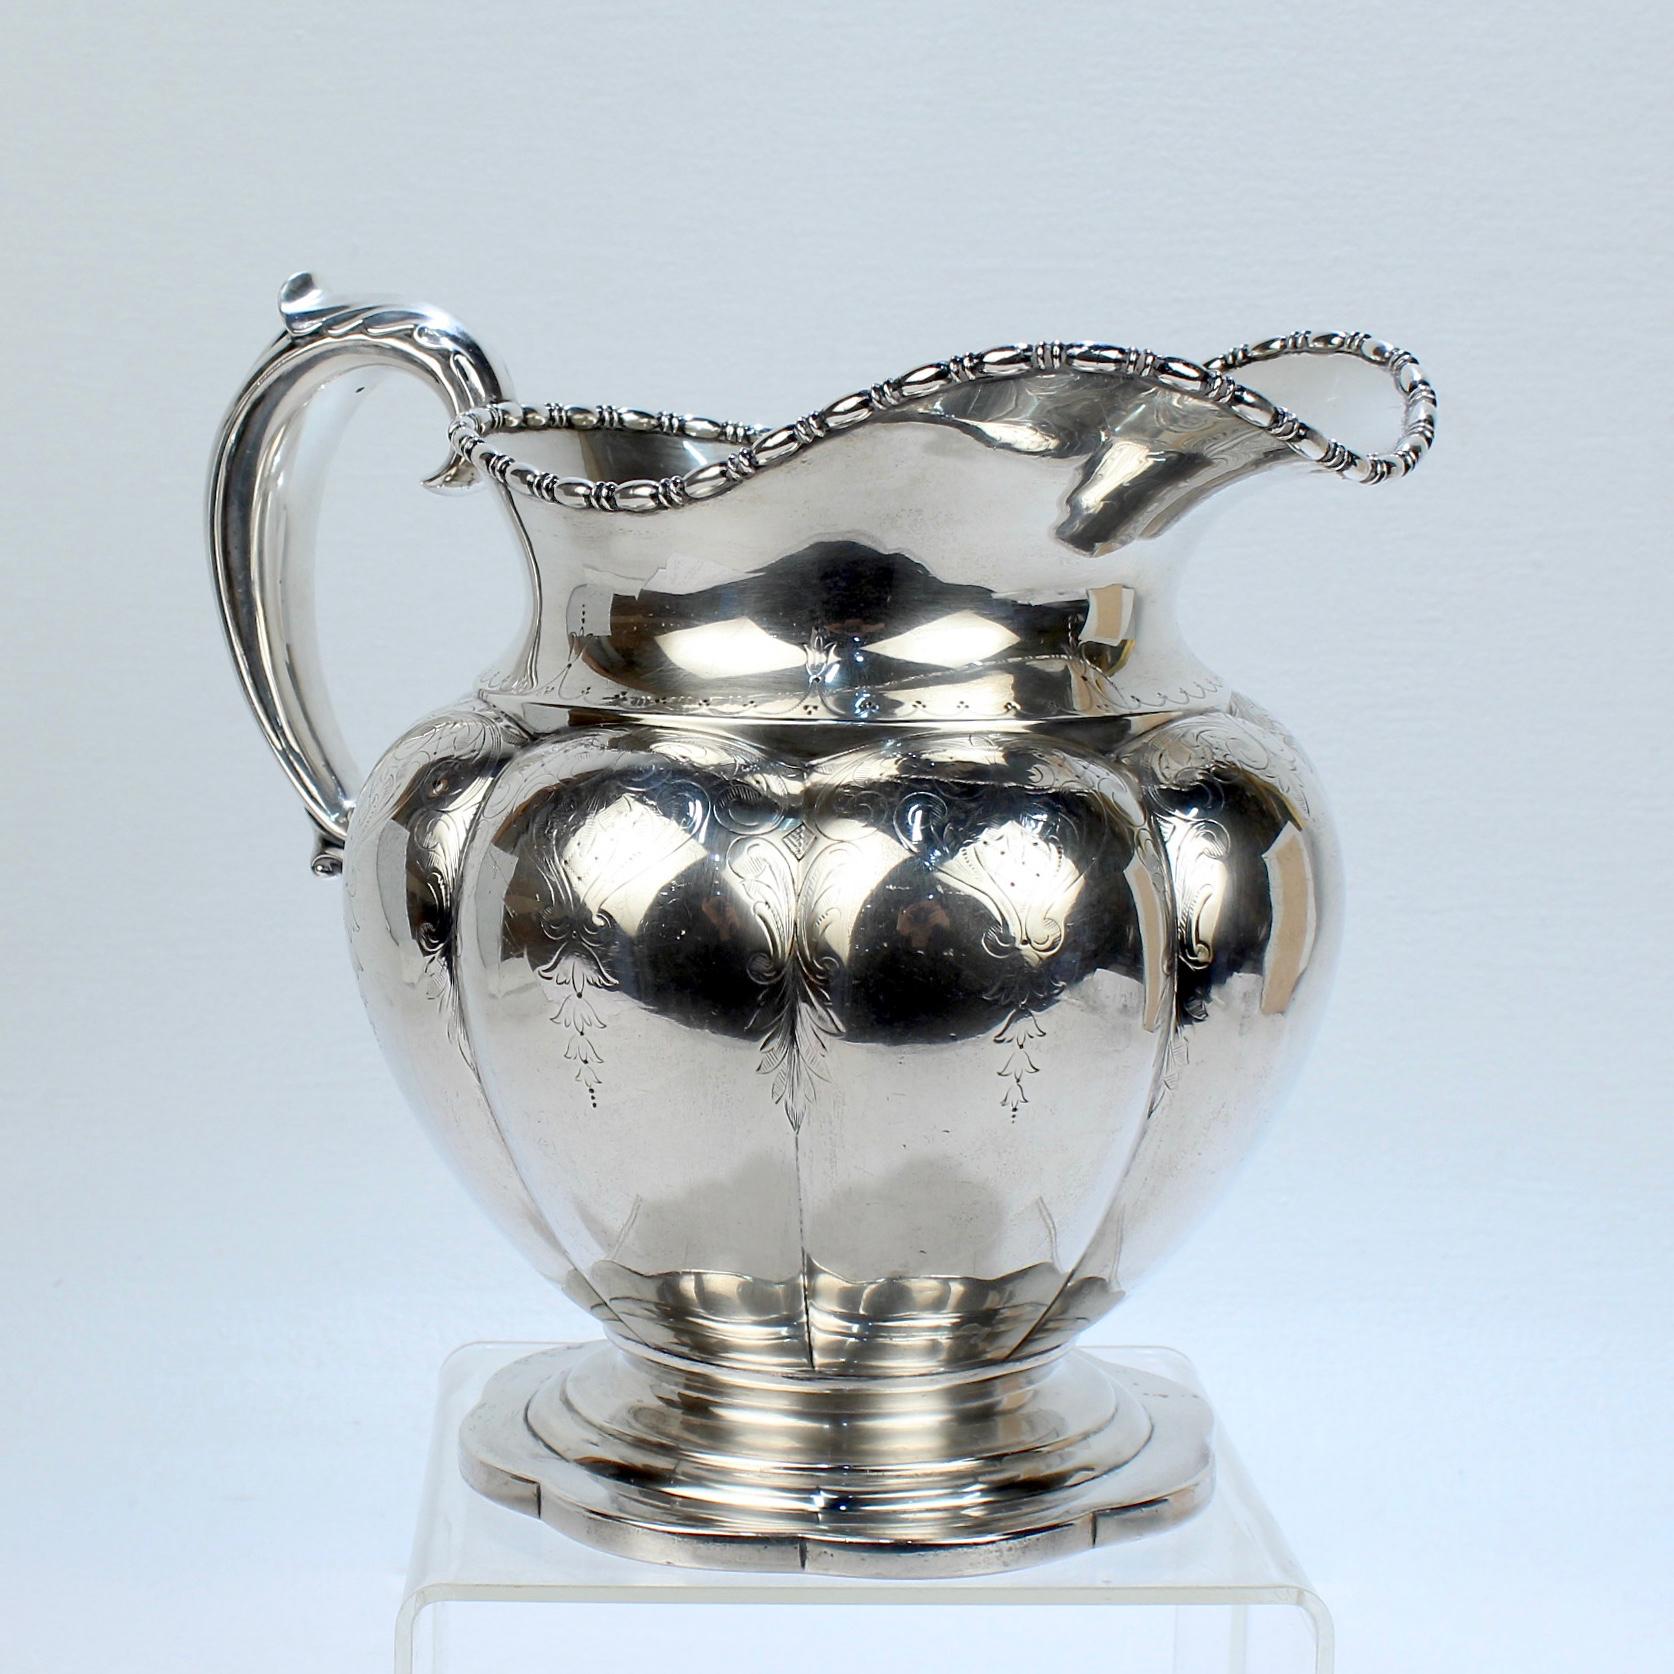 A wonderful antique American sterling silver water pitcher.

Made by Goodnow & Jenks of Boston and retailed by Bigelow, Kennard & Co.

The pitcher has an terrific lobed, vasi-form body, a gadrooned rim, a scalloped foot, and intricate engraved